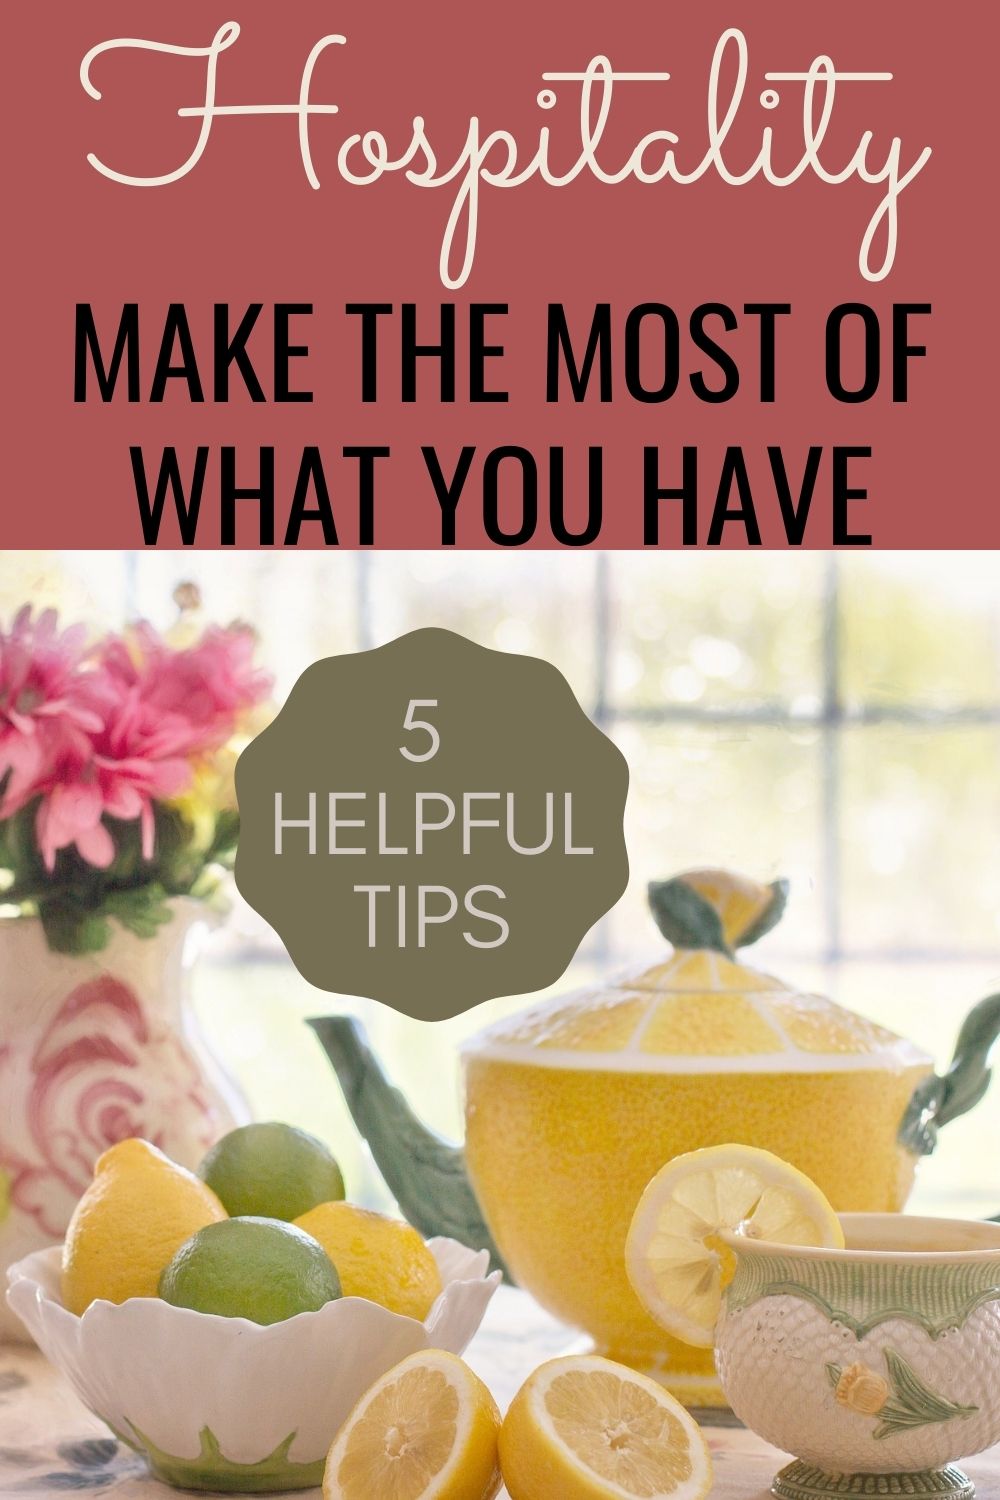 practicing hospitality 5 tips pinterest pin